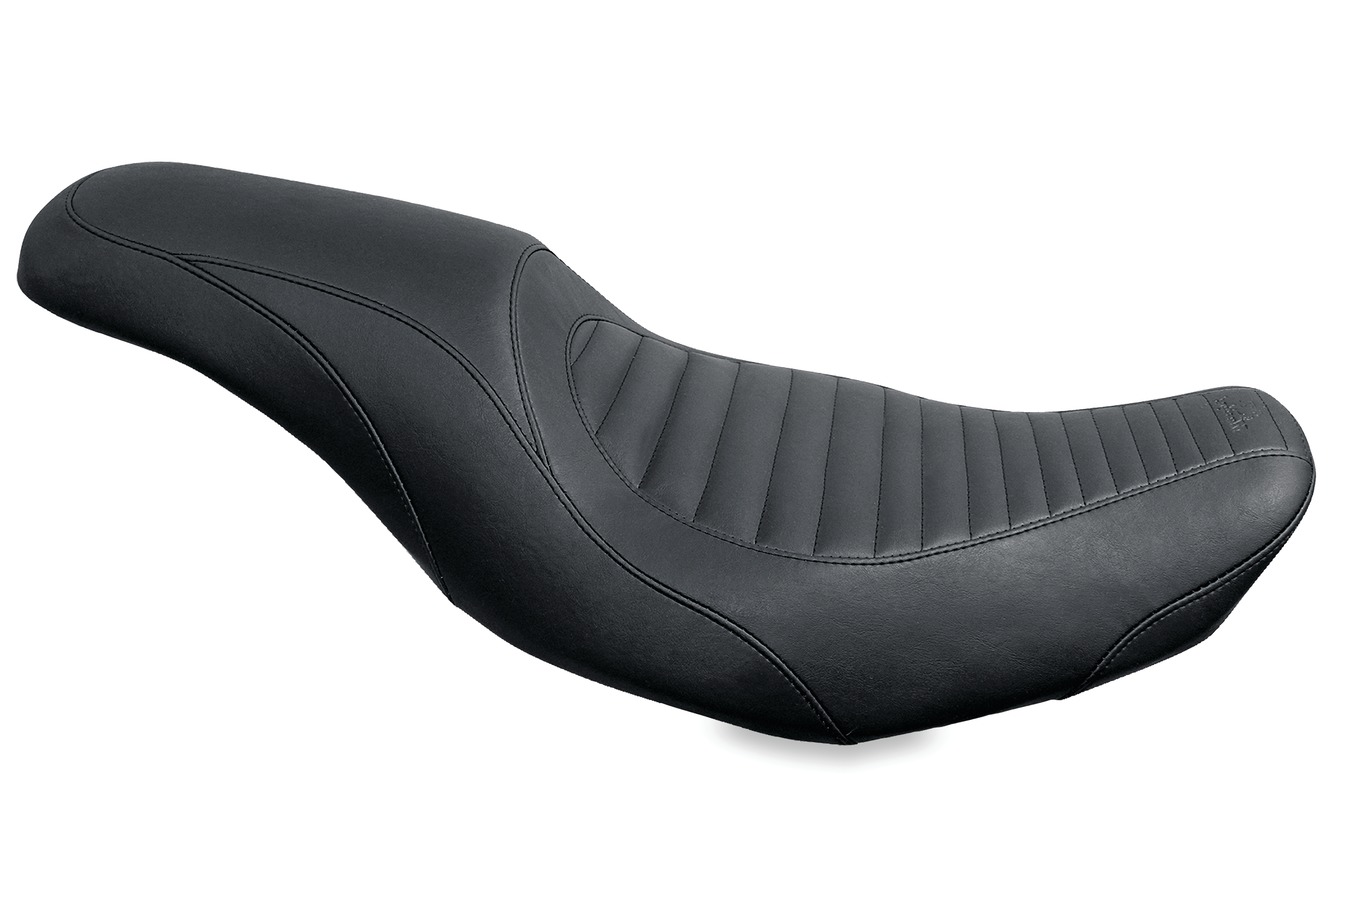 Tripper Fastback™ One-Piece Seat for Harley-Davidson Road King 1997-